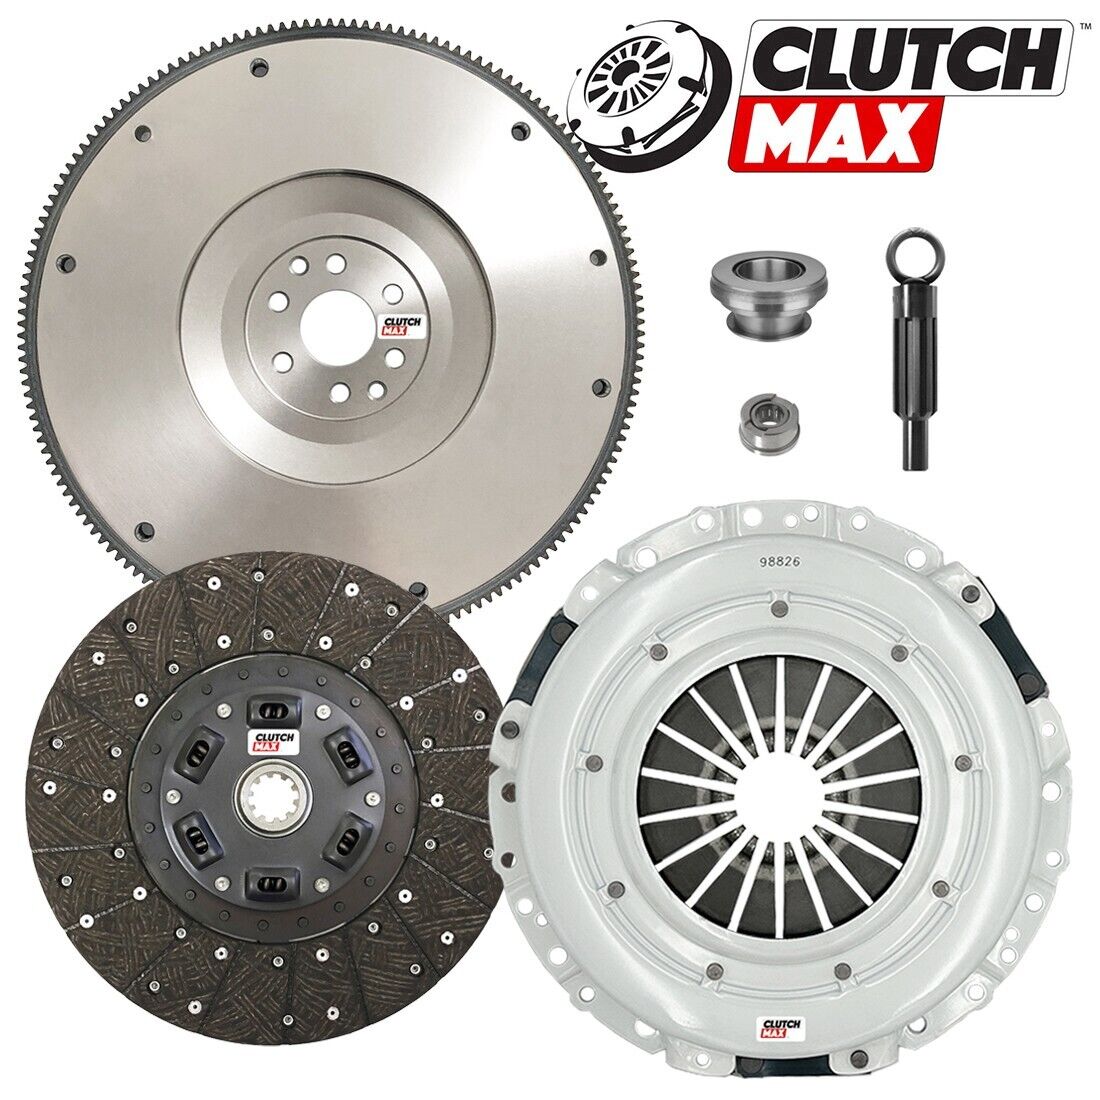 CM STAGE 2 CLUTCH KIT & 6-BOLT MODULAR FLYWHEEL for 96-04 FORD MUSTANG 4.6L